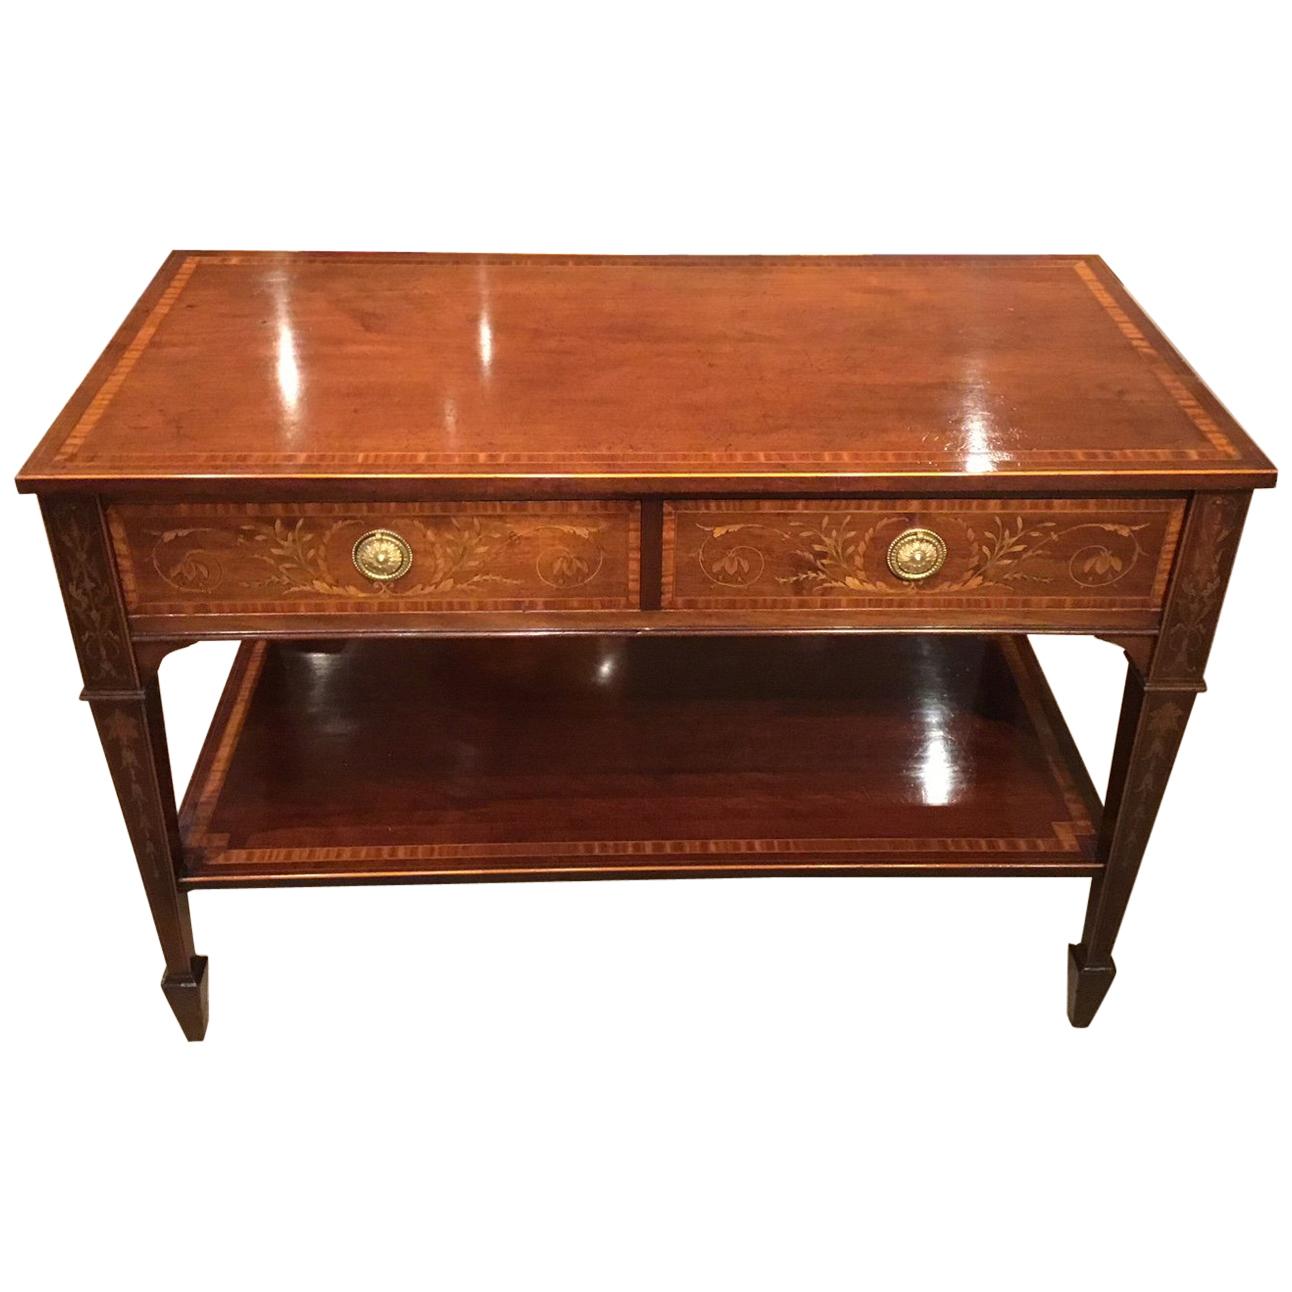 Marquetry Inlaid Edwardian Period Hall or Antique Side Table